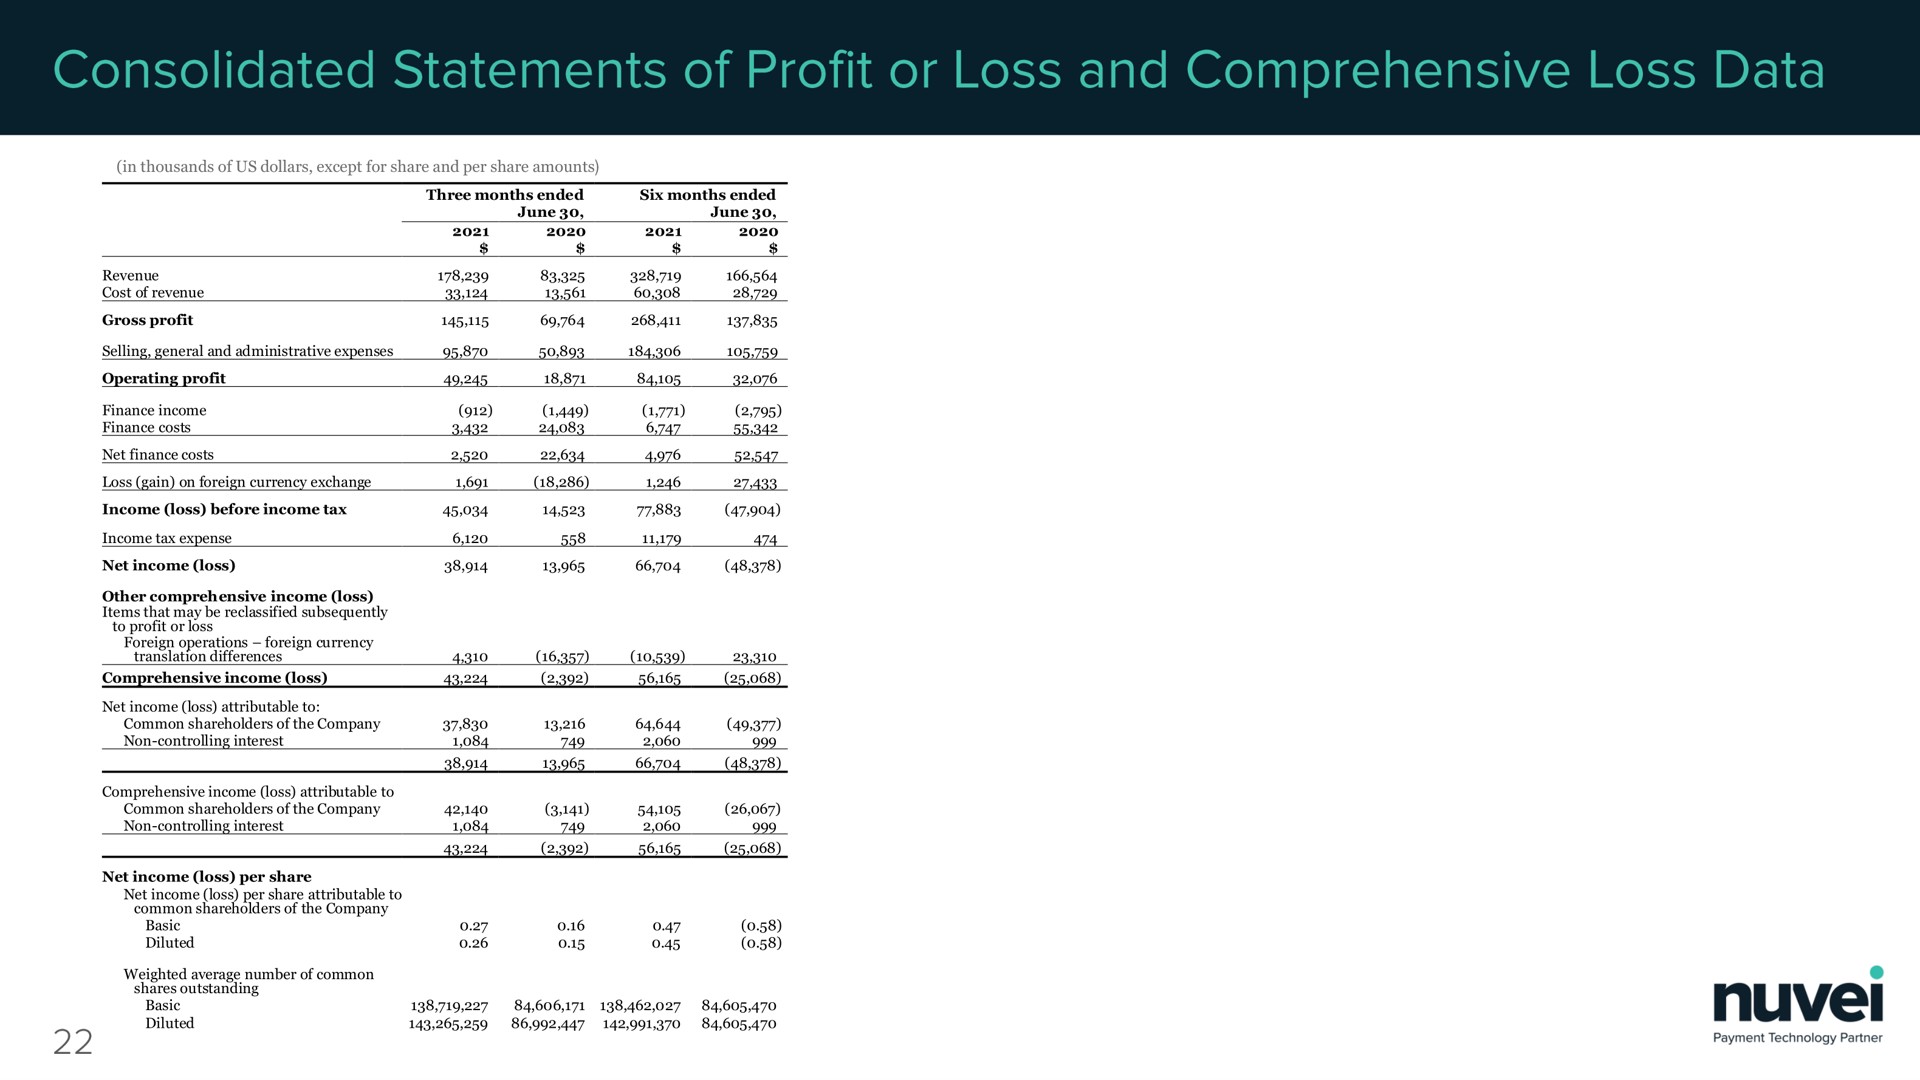 consolidated statements of profit or loss and comprehensive loss data | Nuvei